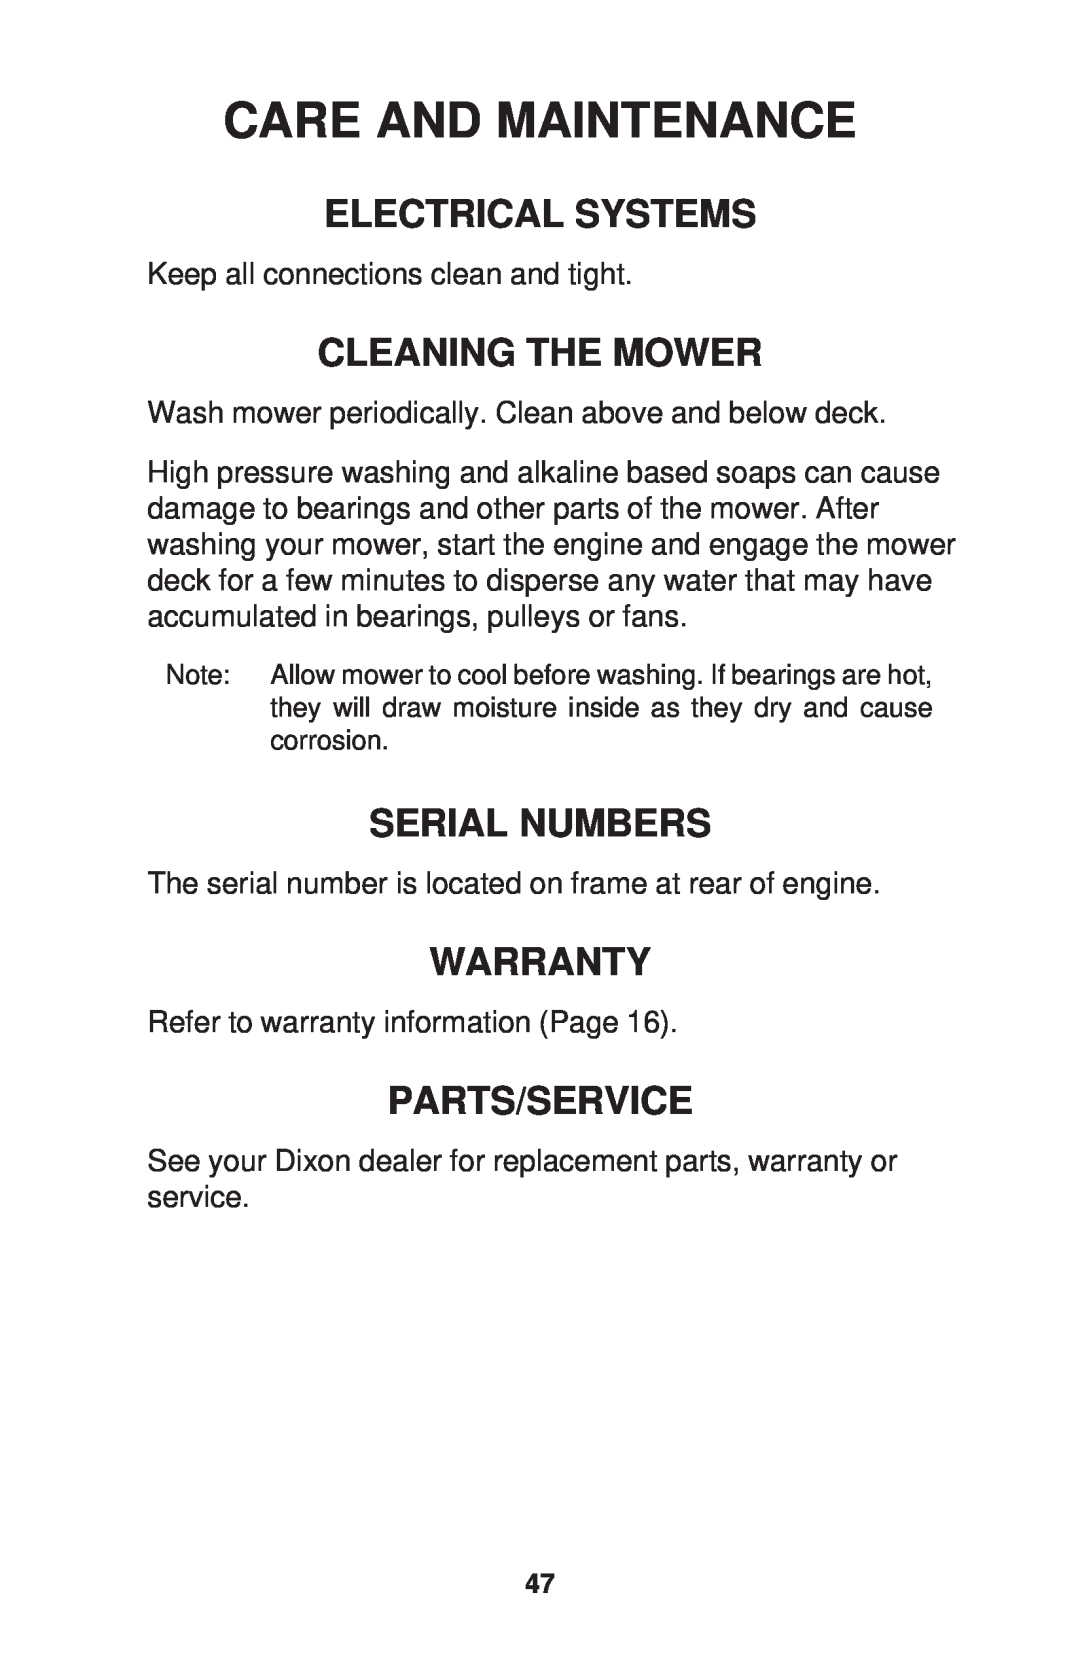 Dixon RAM 44, BS, BS, HON, KOH, KAW, HON Electrical Systems, Cleaning The Mower, Serial Numbers, Warranty, Parts/Service 